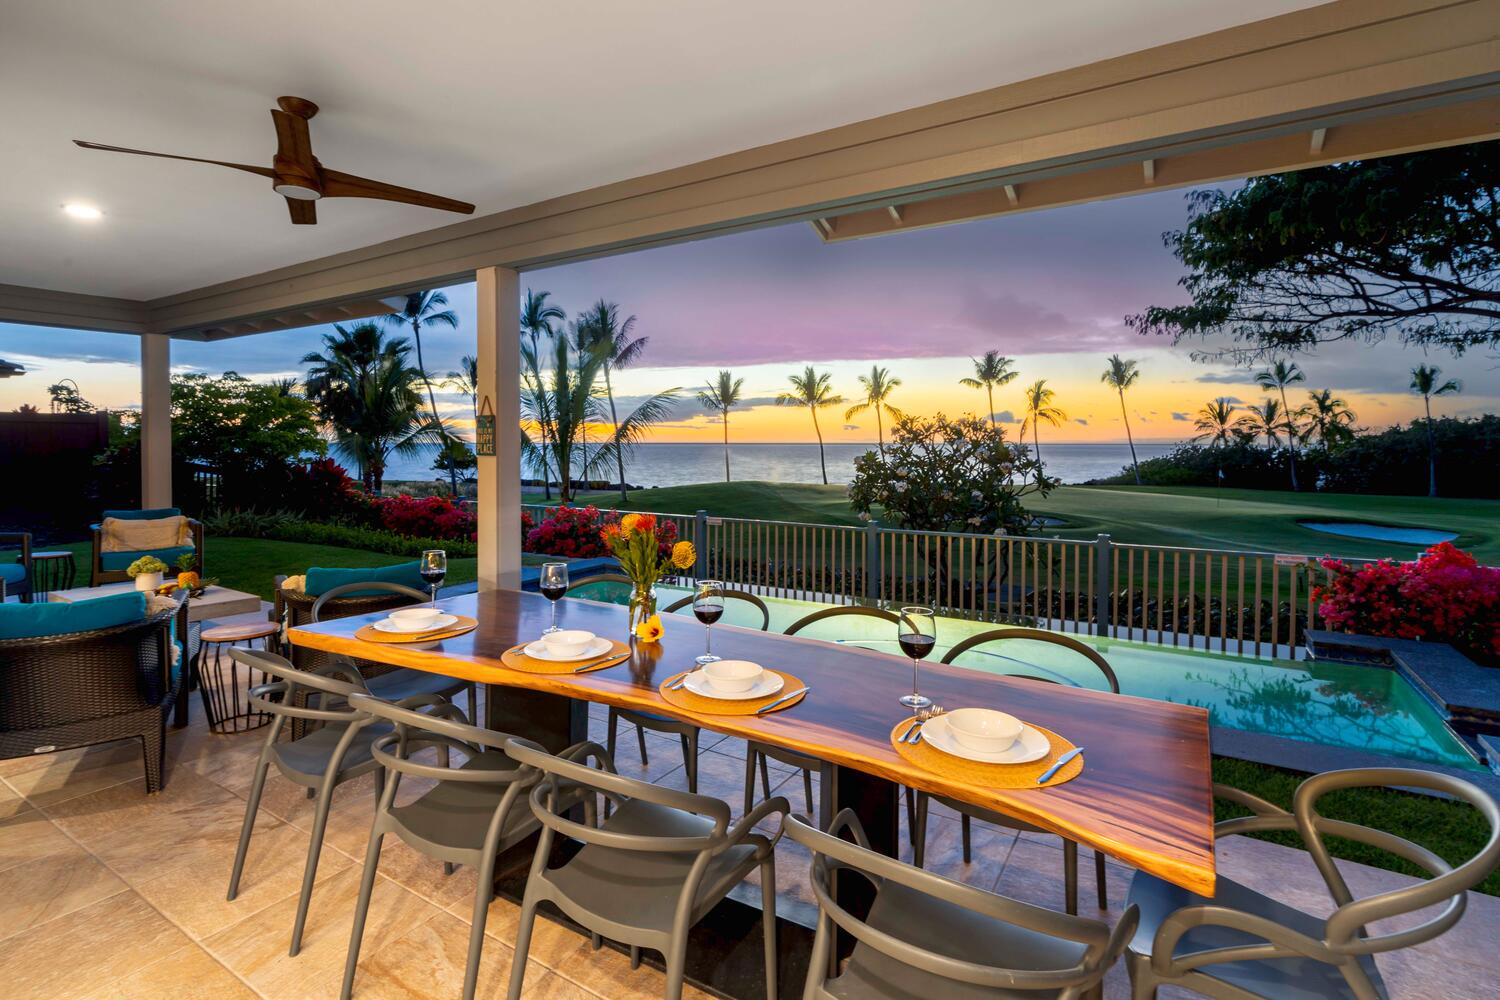 Kailua-Kona Vacation Rentals, Holua Kai #26 - Outdoor dining area overlooking a tranquil pool and ocean at dusk.